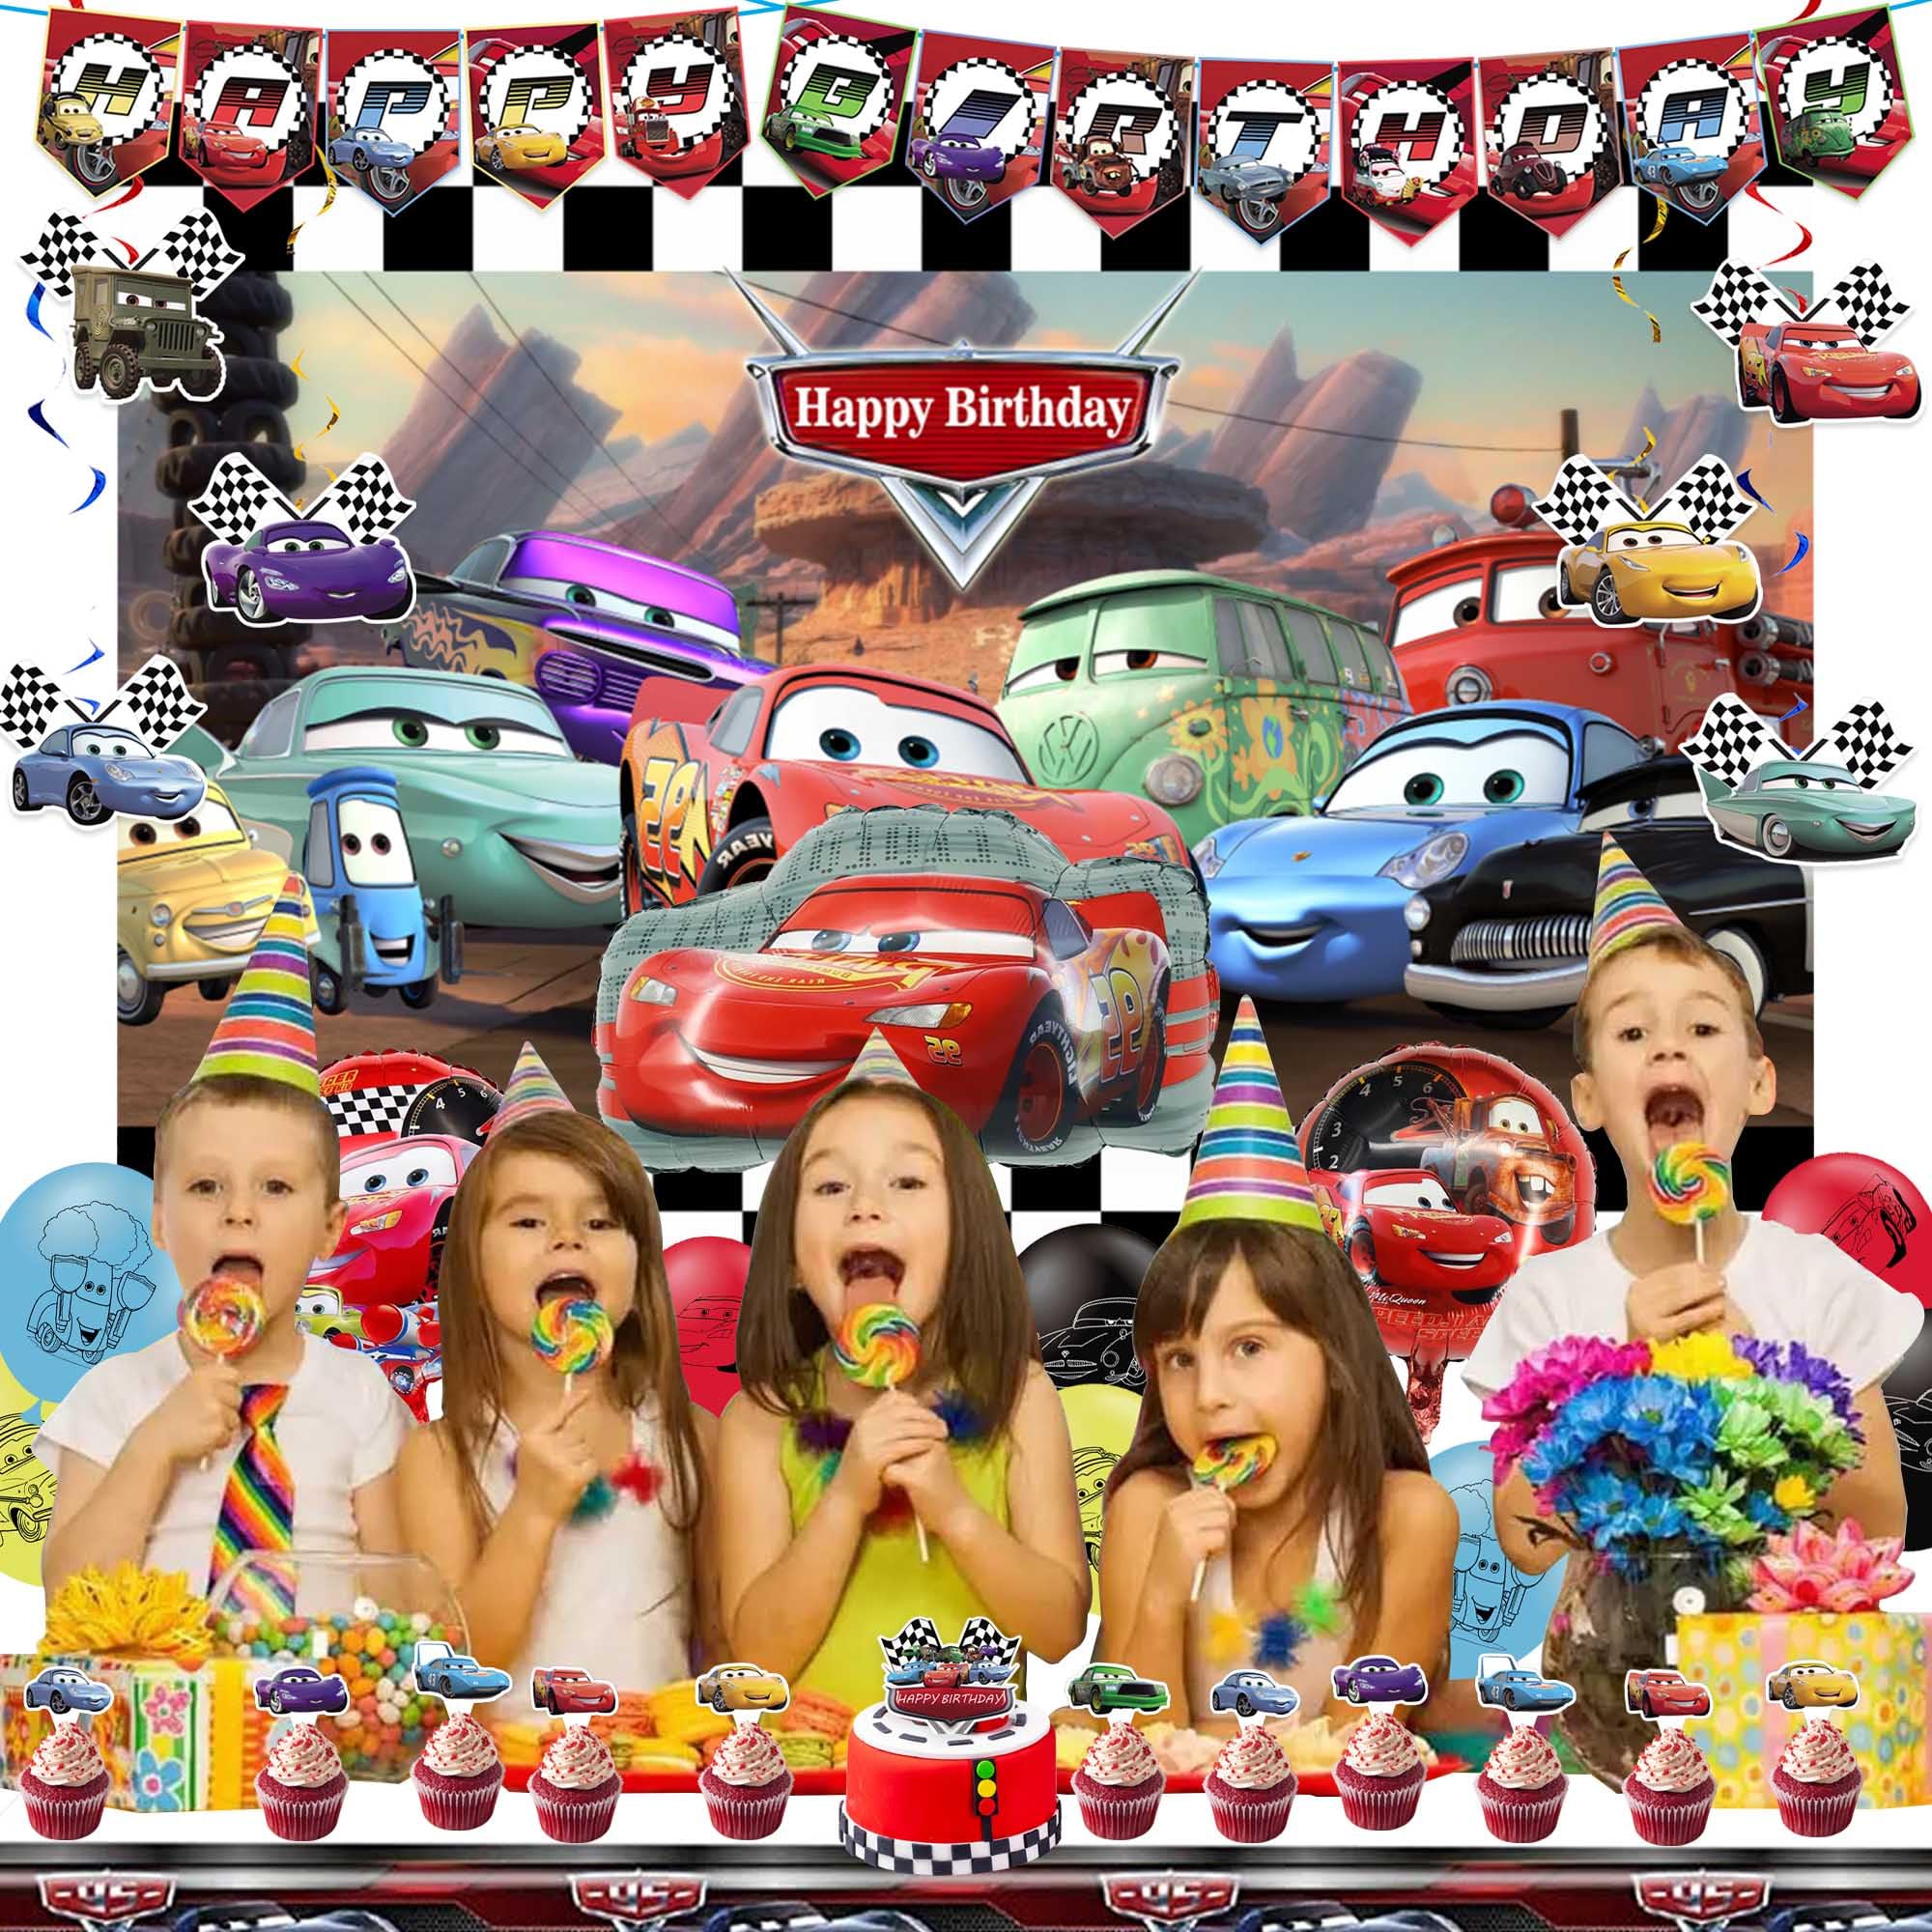 Cars Birthday Party Supplies, Lightning McQueen Cars Birthday Decorations Include Birthday Banner, Foil Balloons, Backdrop, Tablecloth, Cupcake Toppers for Boys Girls